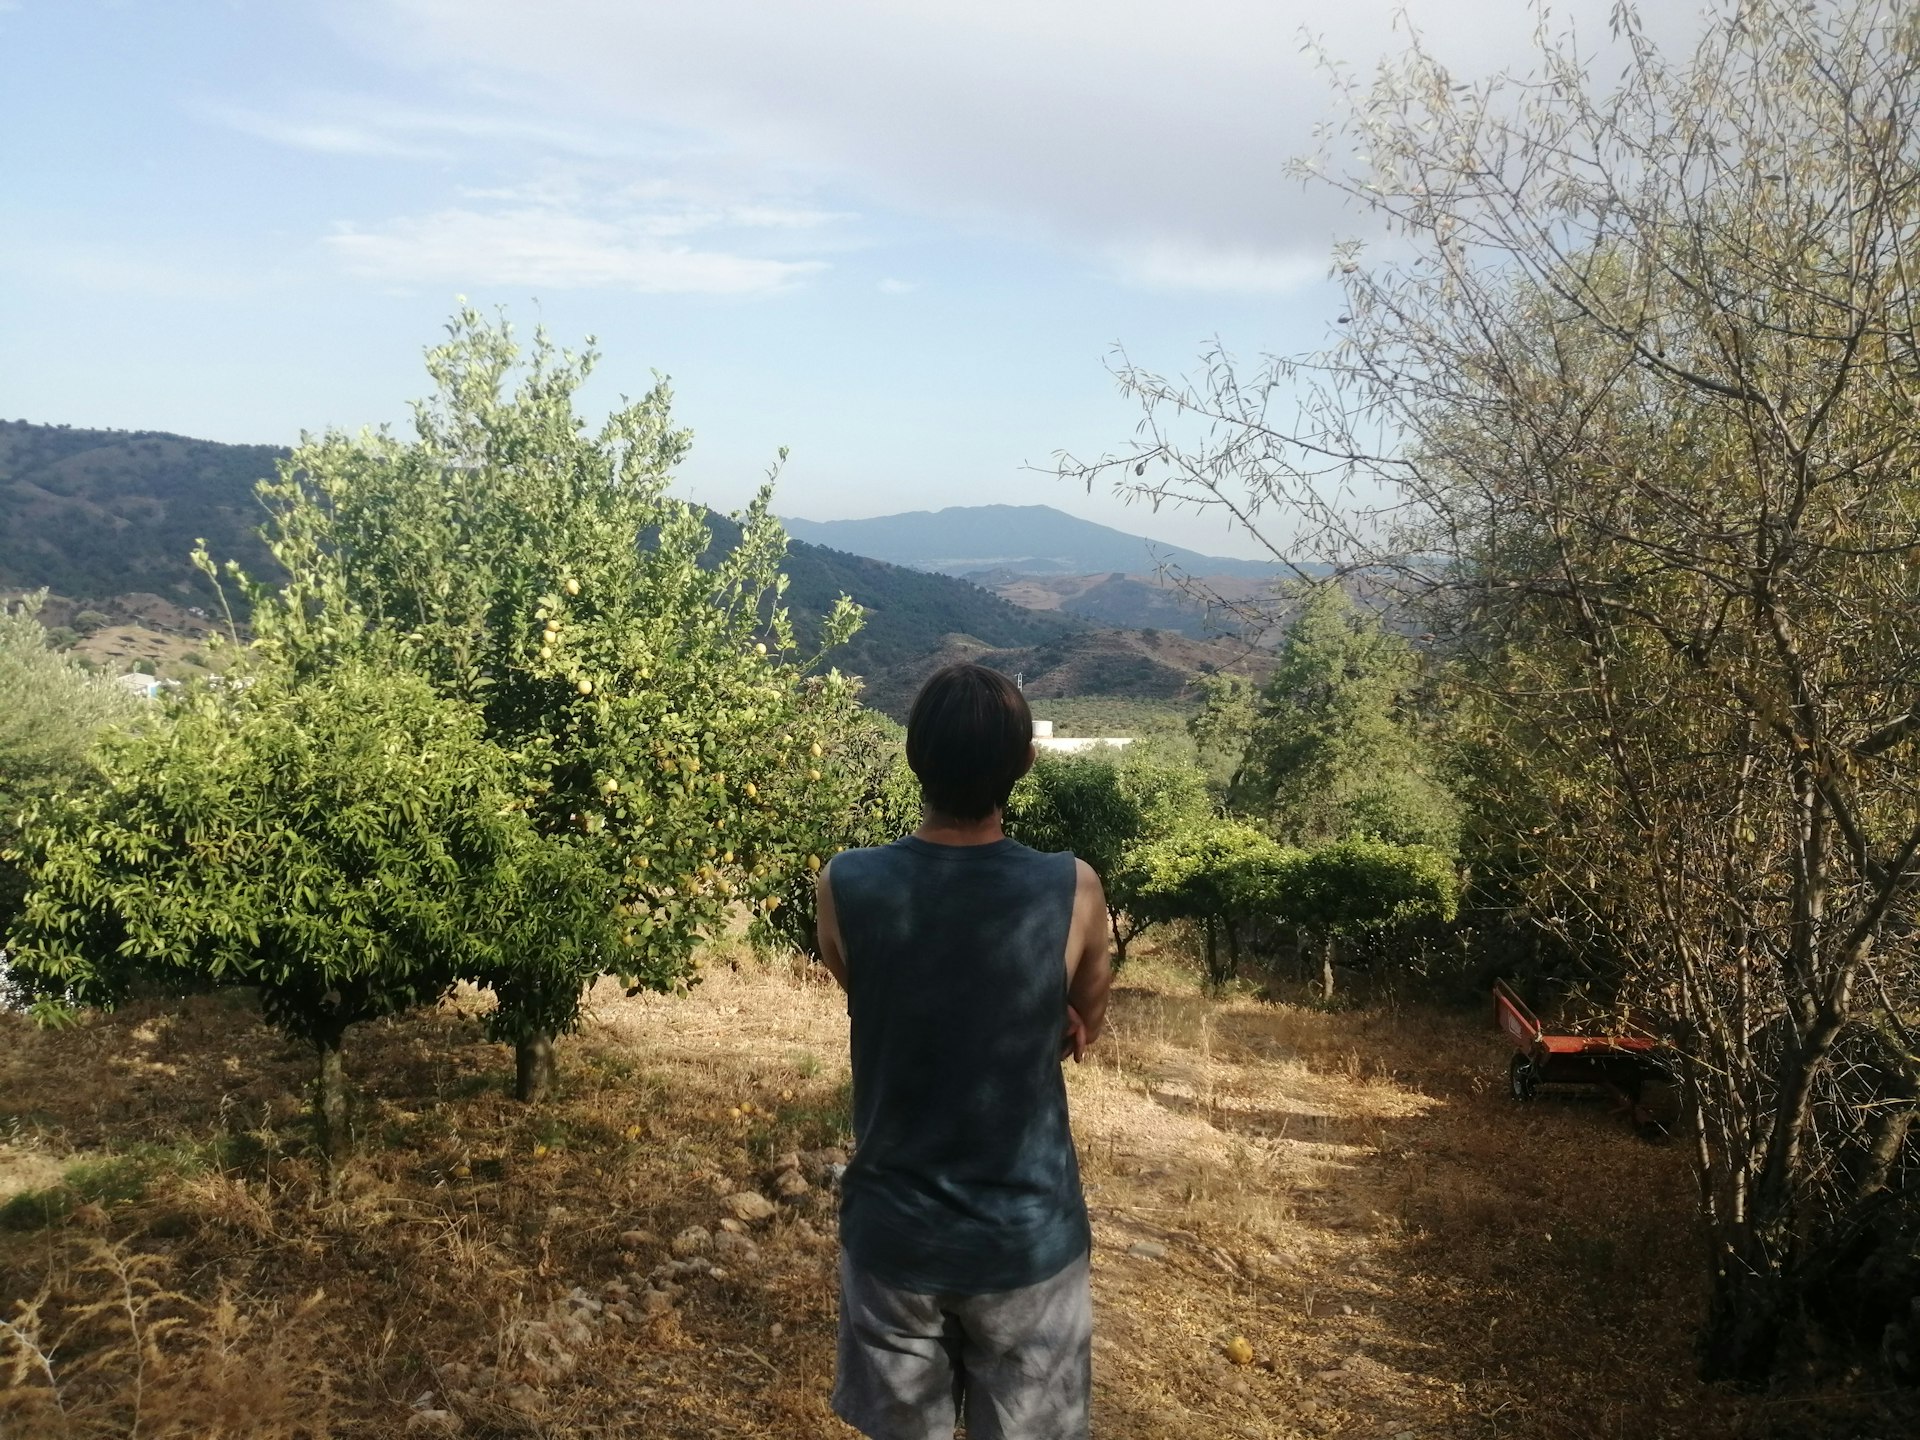 A man stands facing away from the camera looking into citrus groves with rolling hillsides in the distance